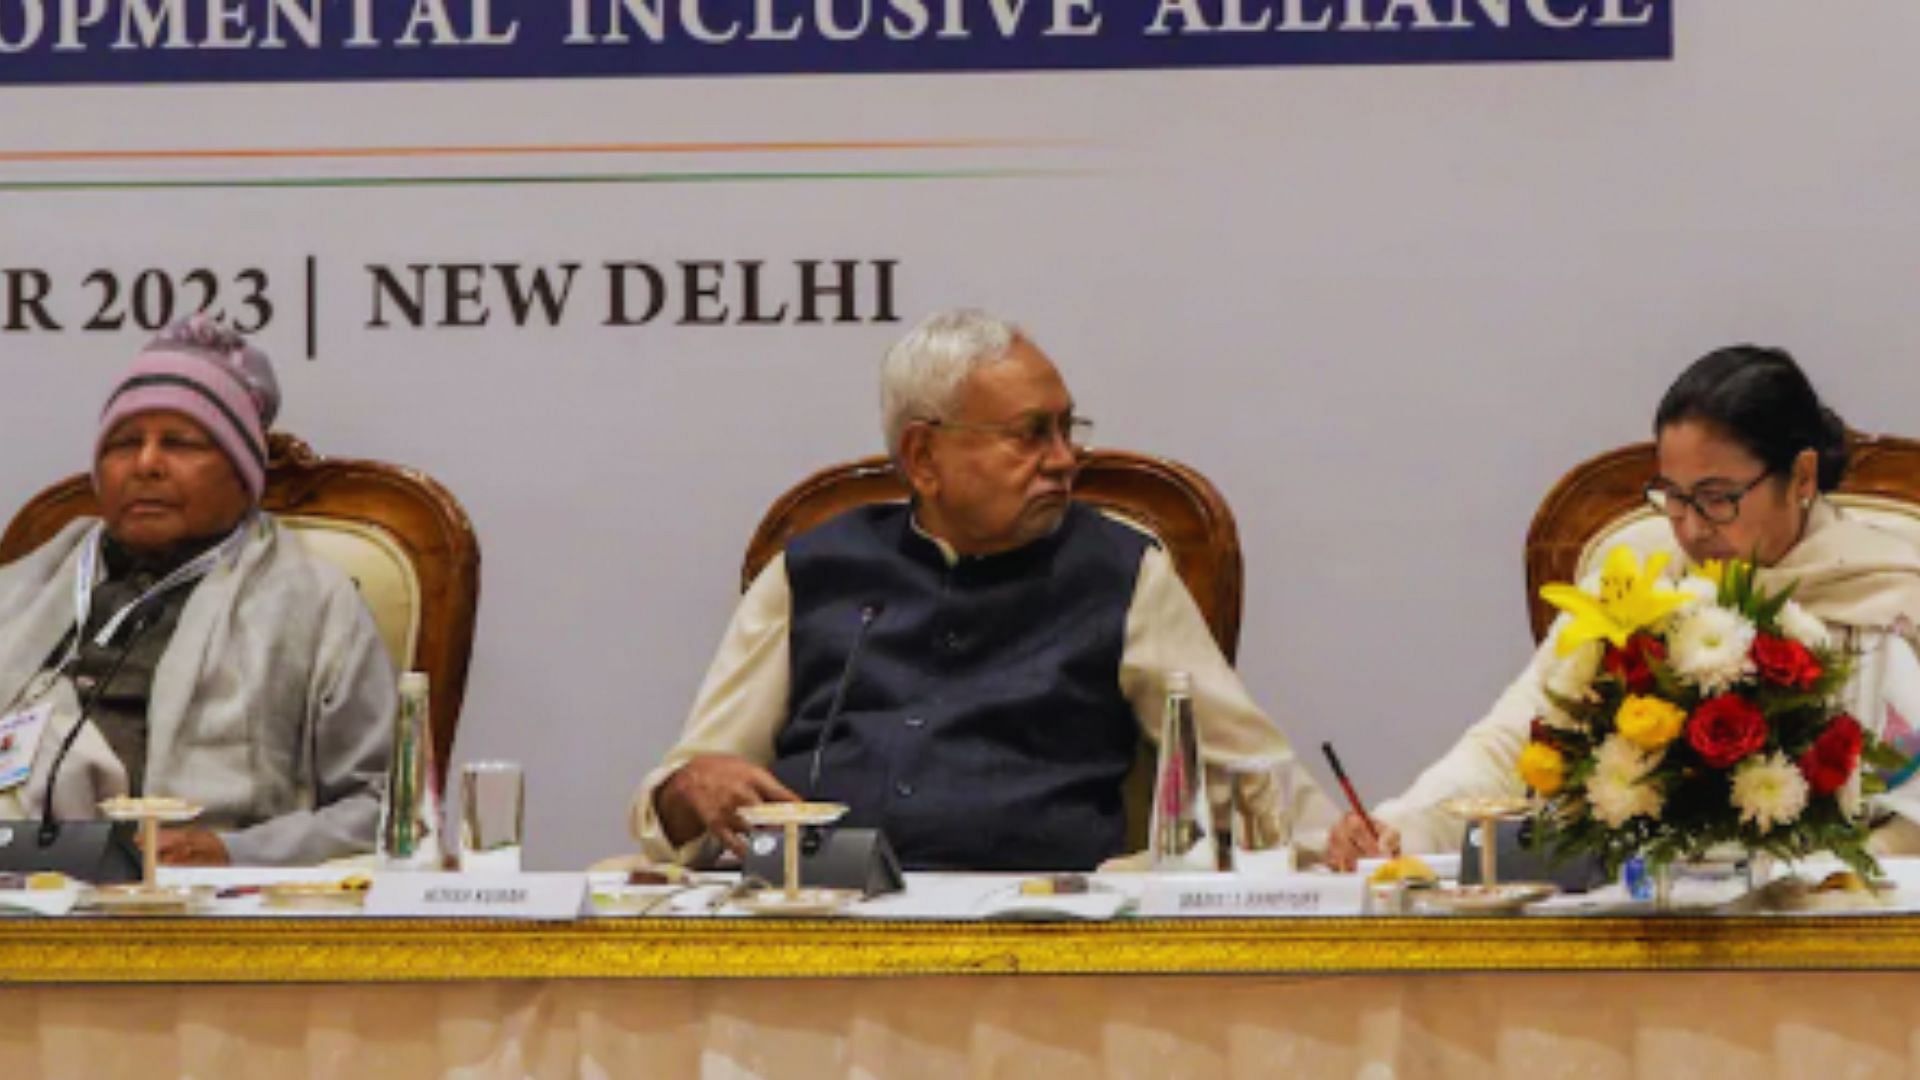 <div class="paragraphs"><p>(L-R) RJD chief Lalu Prasad Yadav, Bihar Chief Minister Nitish Kumar, West Bengal Chief Minister Mamata Banerjee during an INDIA meet. Image used for representation only.&nbsp;</p></div>